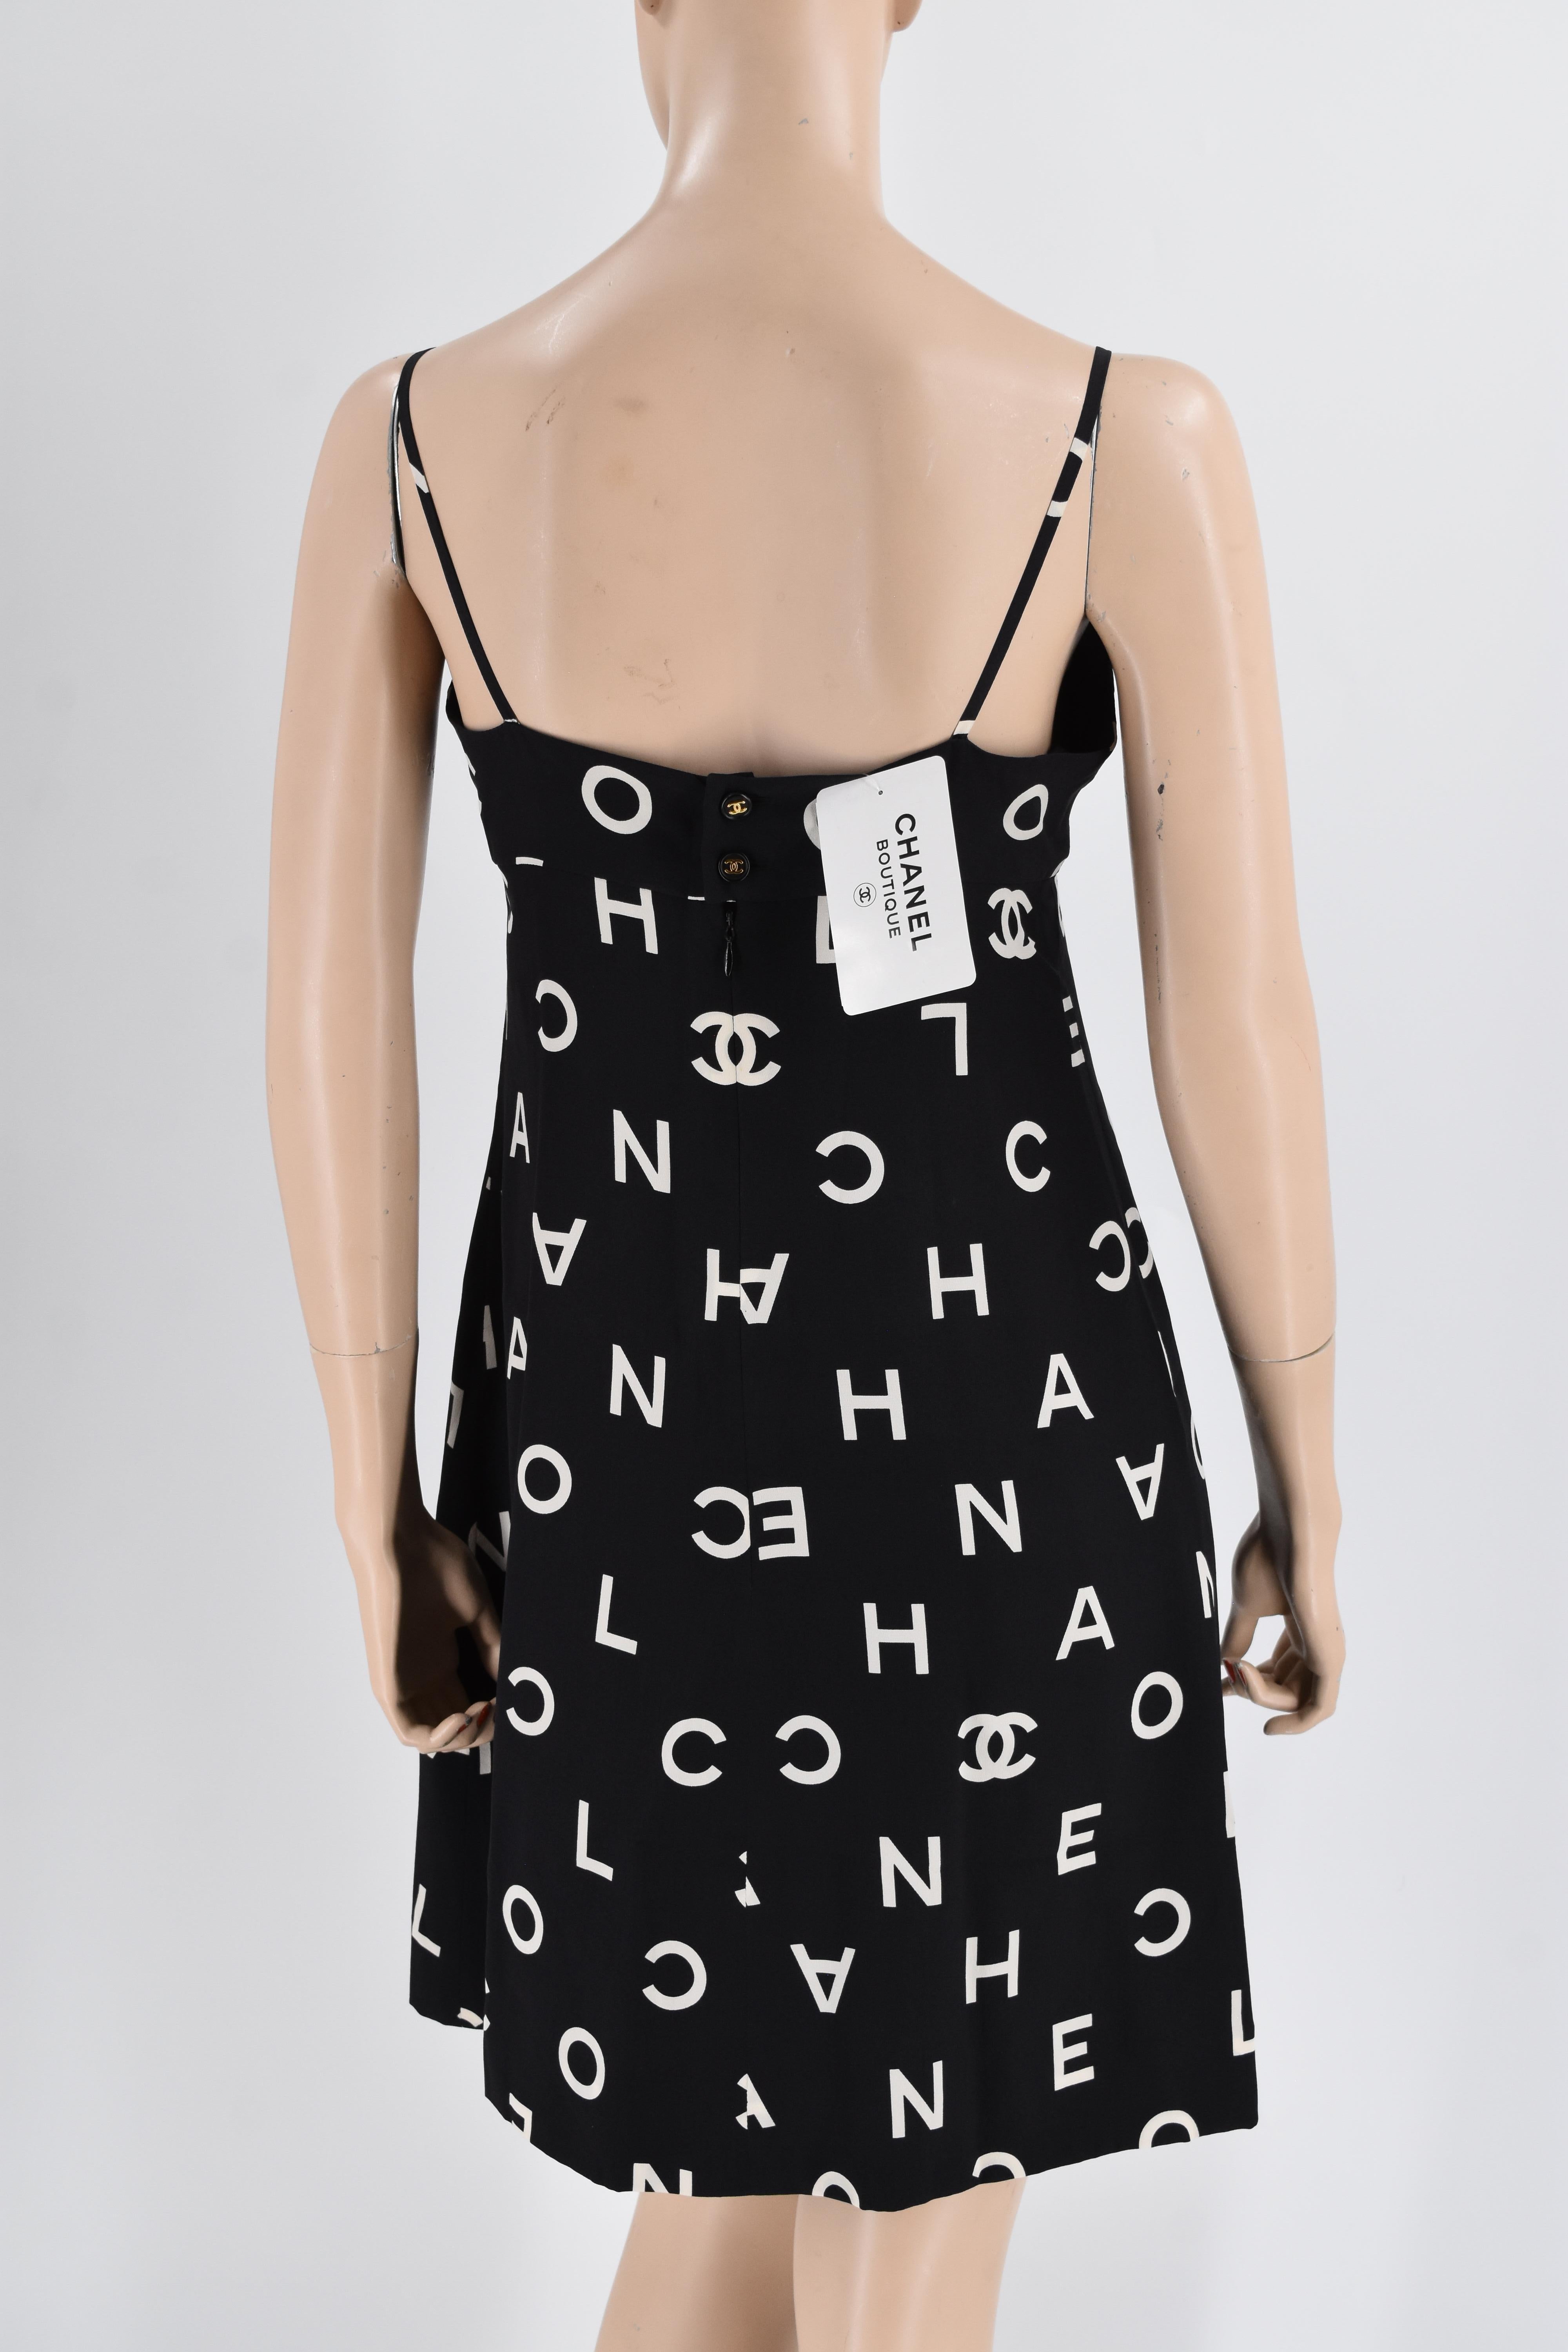 Chanel 97P Spring 1997 Most Wanted Runway Logo Dress 40 NWT In New Condition For Sale In Merced, CA